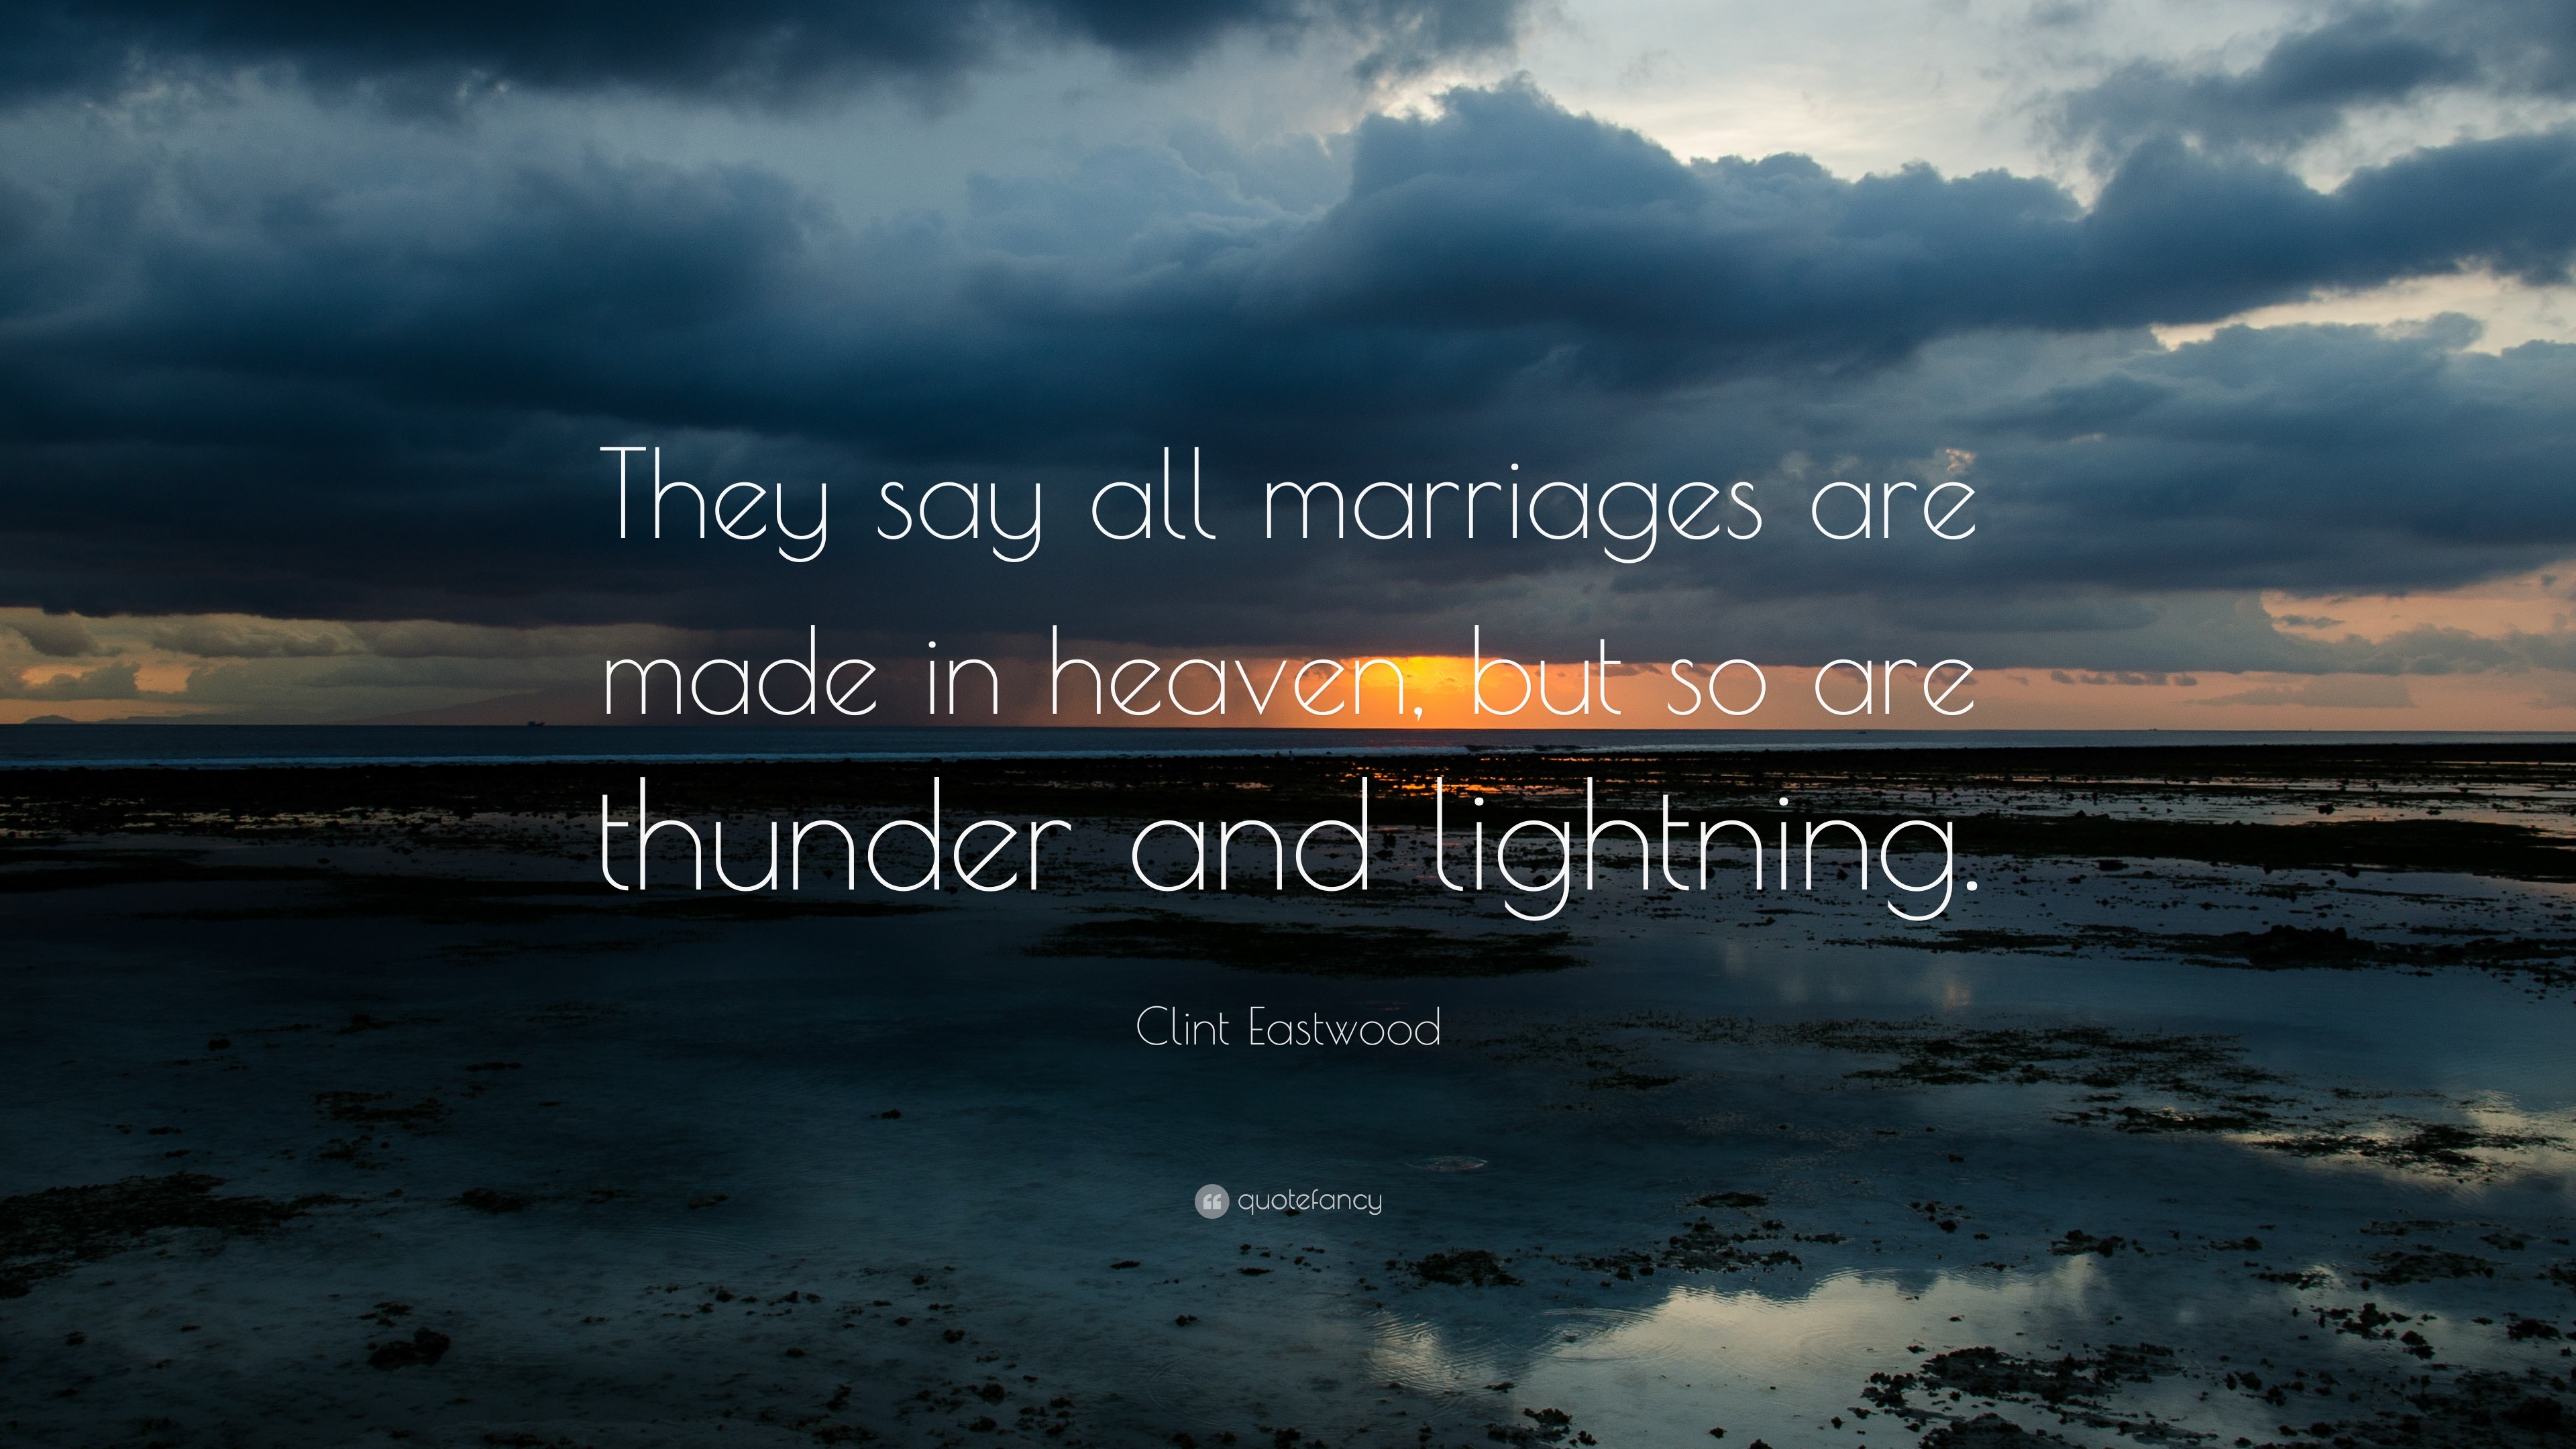 Clint Eastwood Quote: “They say all marriages are made in heaven, but so  are thunder and